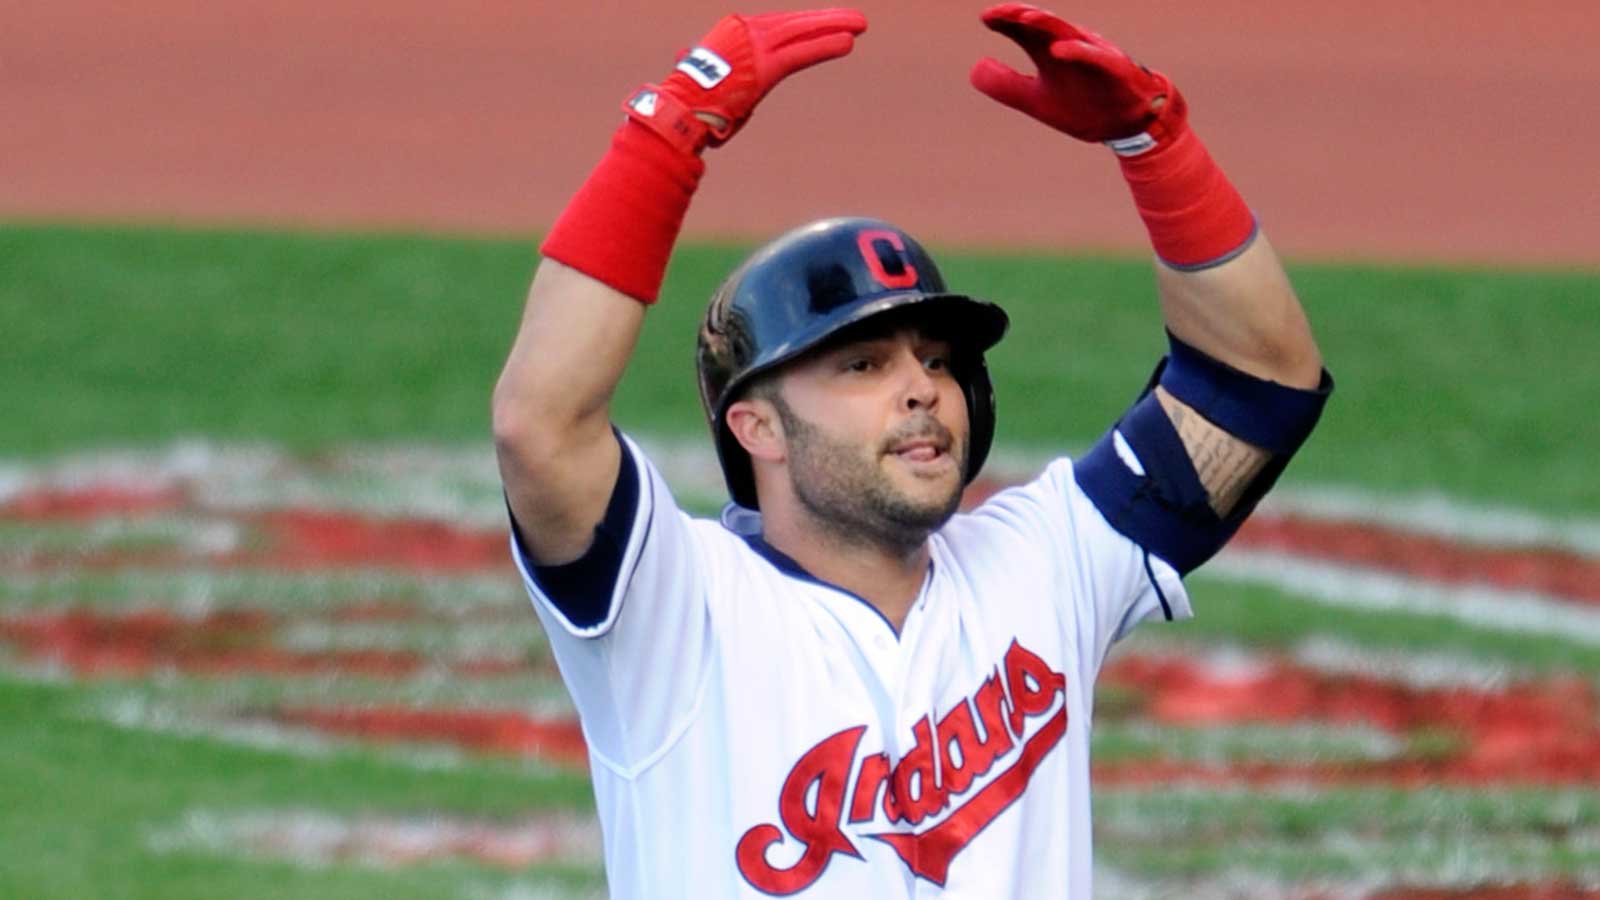 EJax must go! Interview with a candidate: Nick Swisher